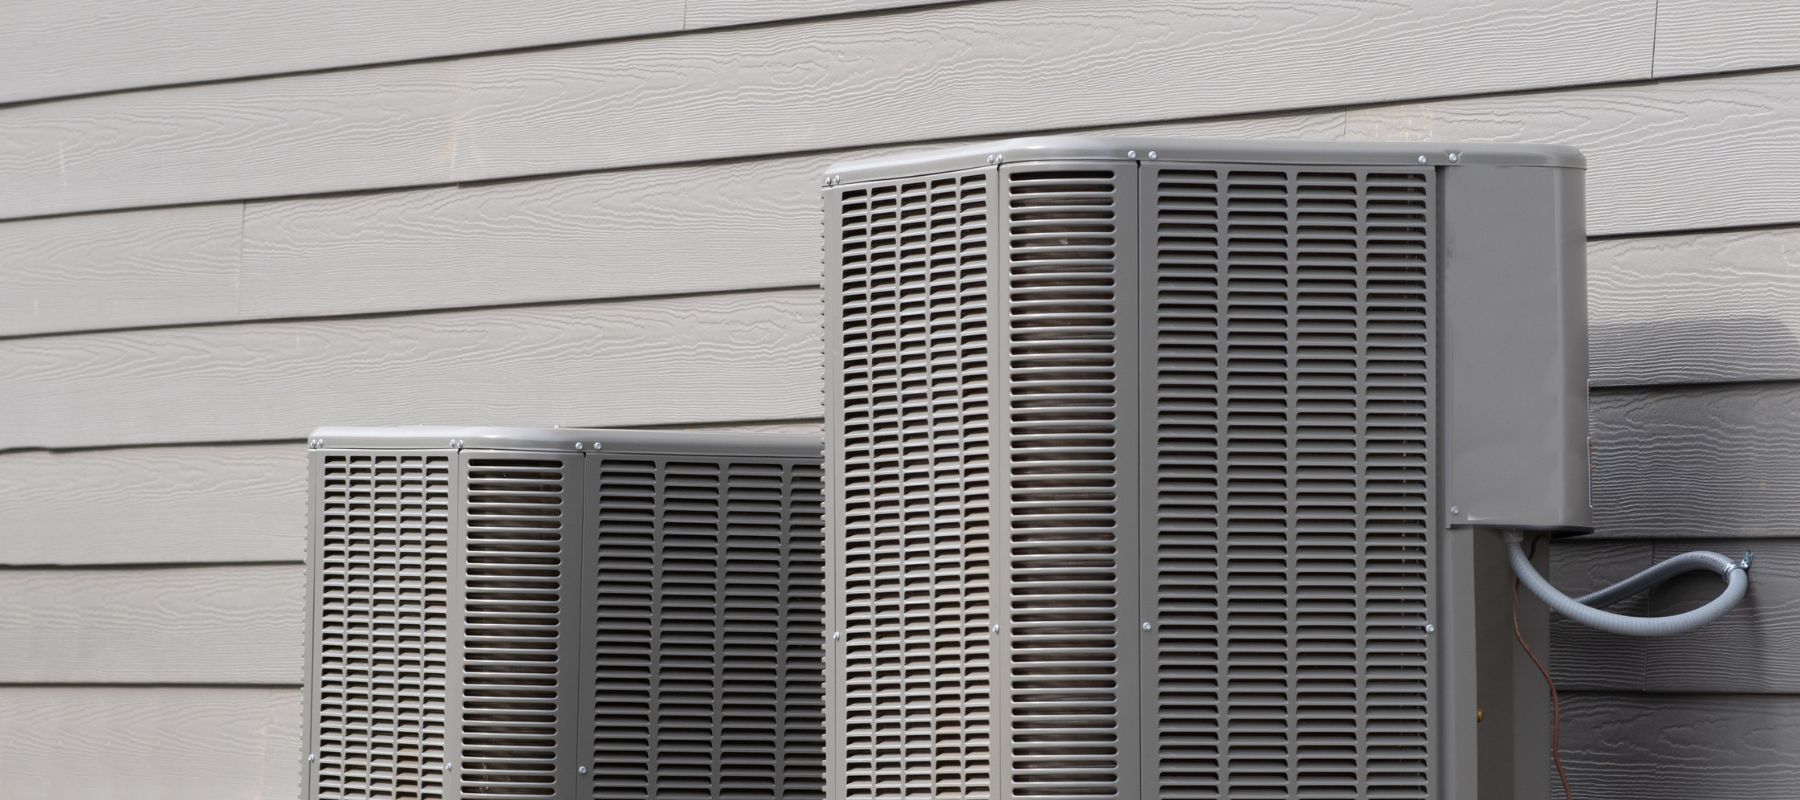 outdoor hvac units positioned outside of home